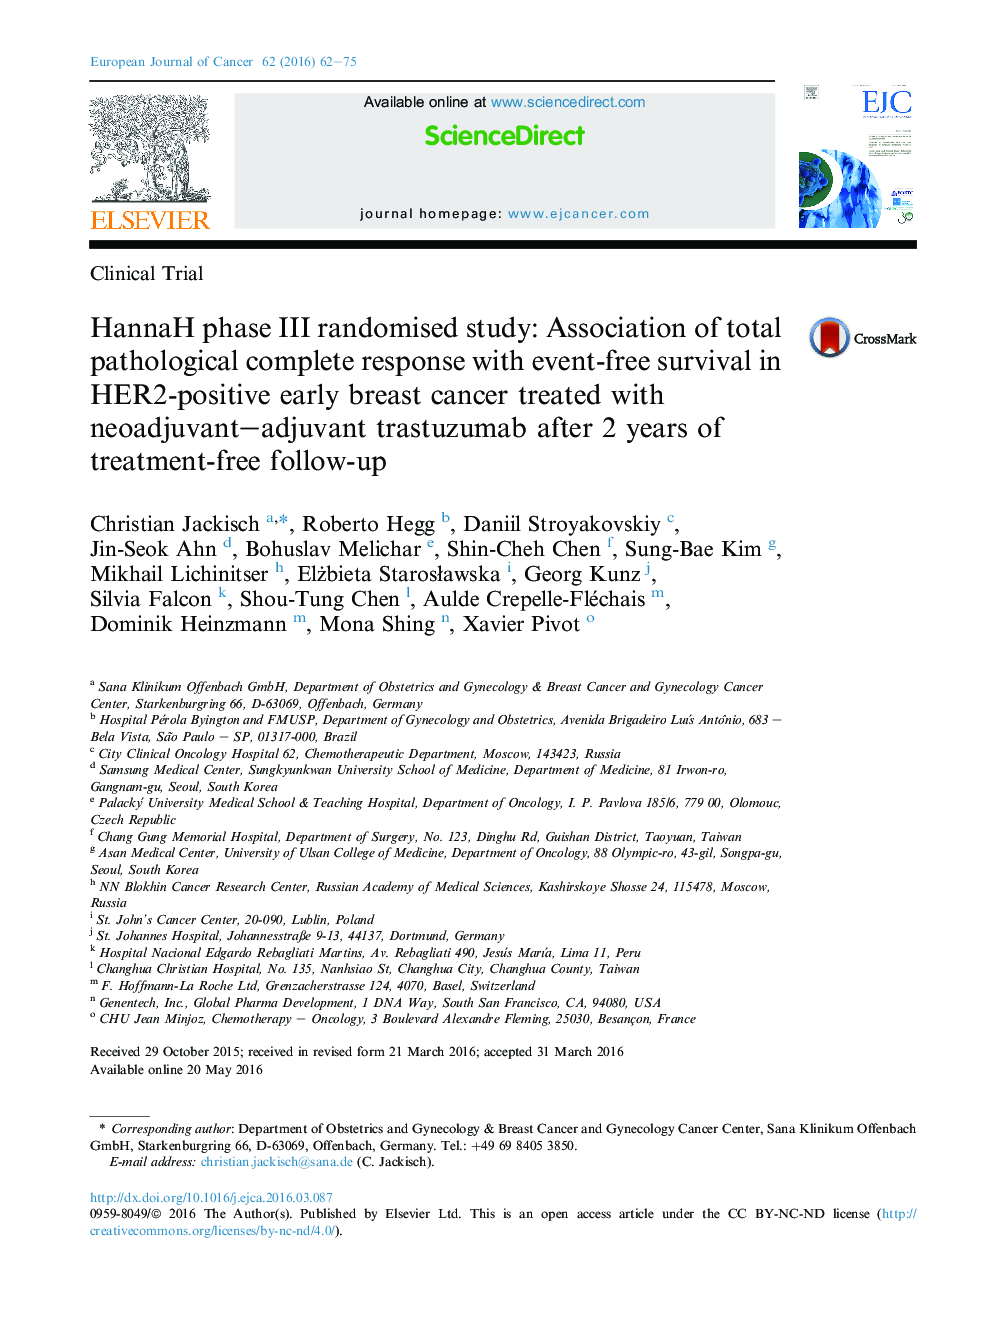 HannaH phase III randomised study: Association of total pathological complete response with event-free survival in HER2-positive early breast cancer treated with neoadjuvant-adjuvant trastuzumab after 2 years of treatment-free follow-up